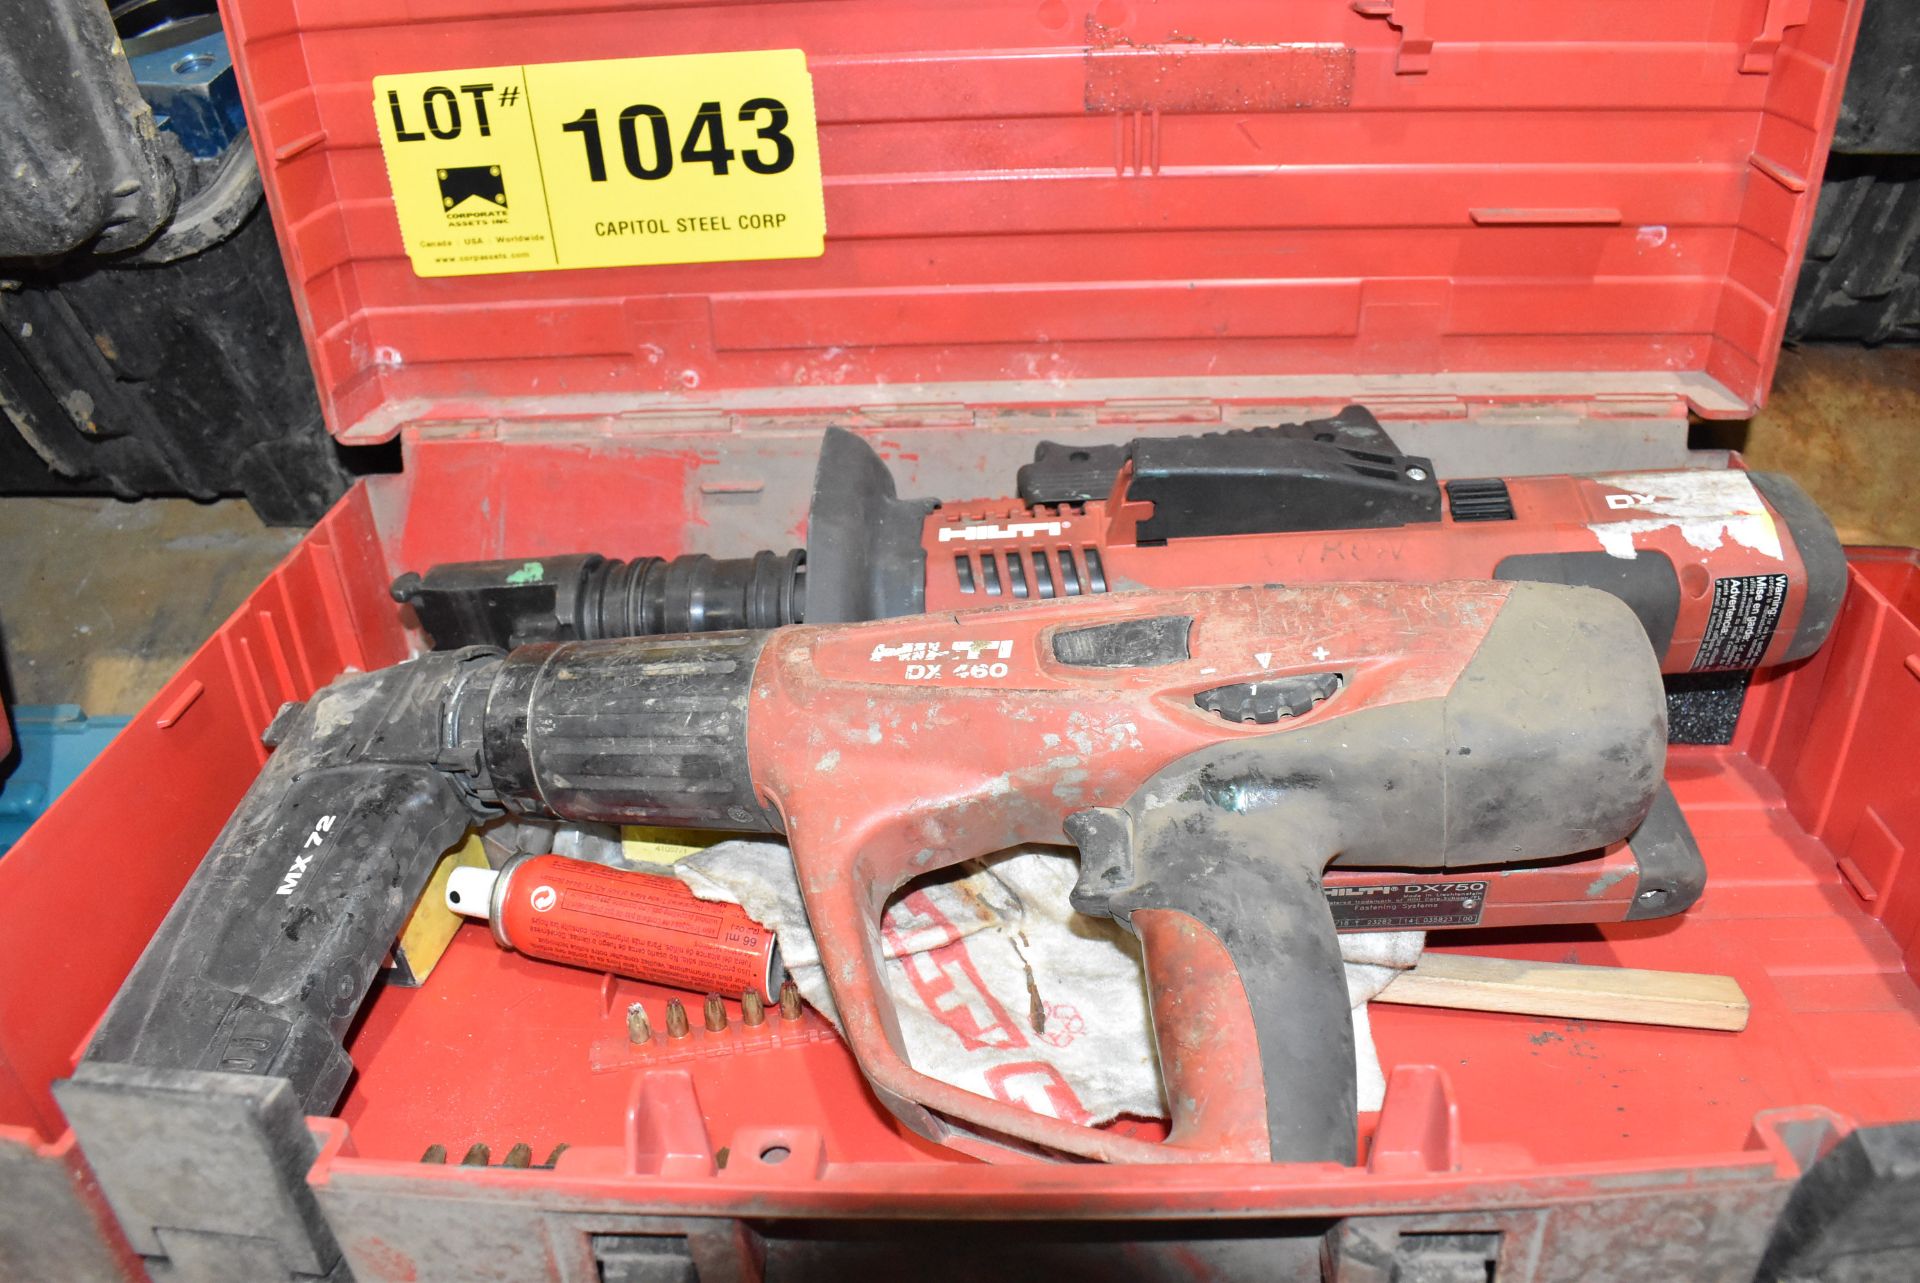 LOT/ HILTI DX460 FULLY AUTOMATIC POWER-ACTUATED FASTENING TOOL WITH HILTI MX72 NAIL MAGAZINE & HILTI